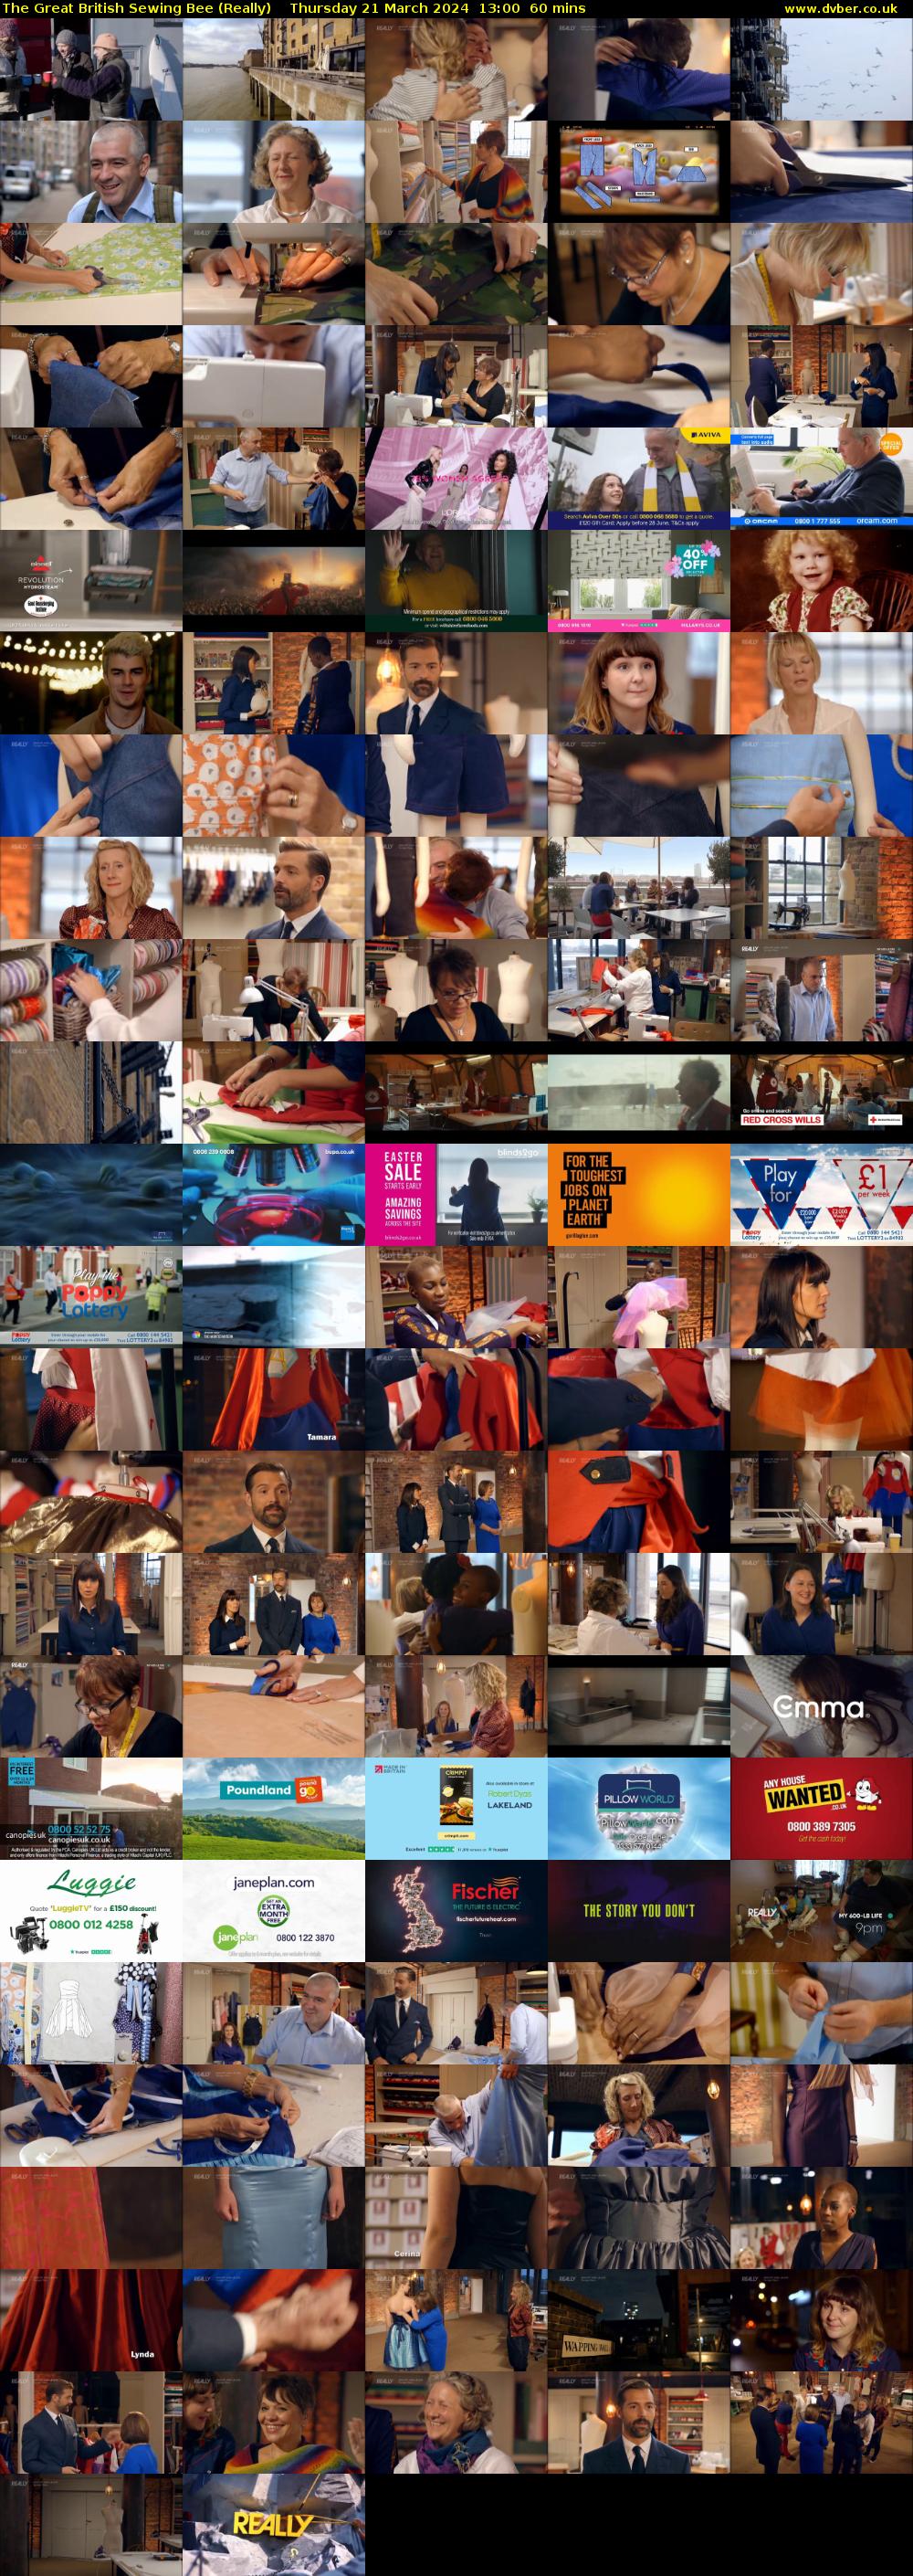 The Great British Sewing Bee (Really) Thursday 21 March 2024 13:00 - 14:00